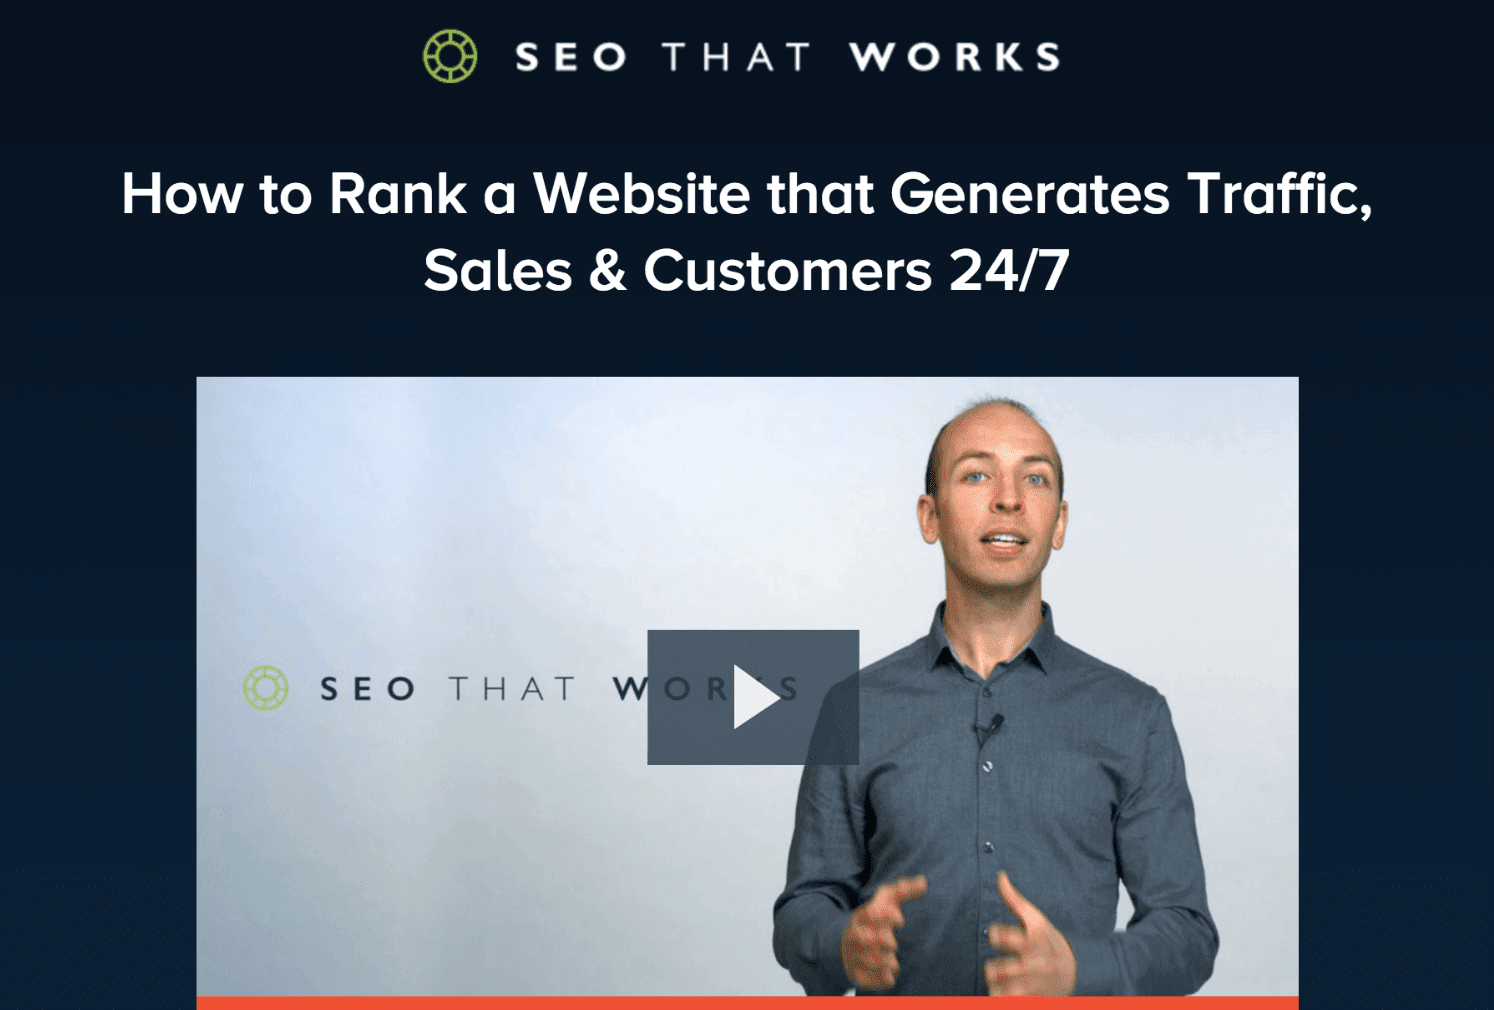 What Is SEO That Works